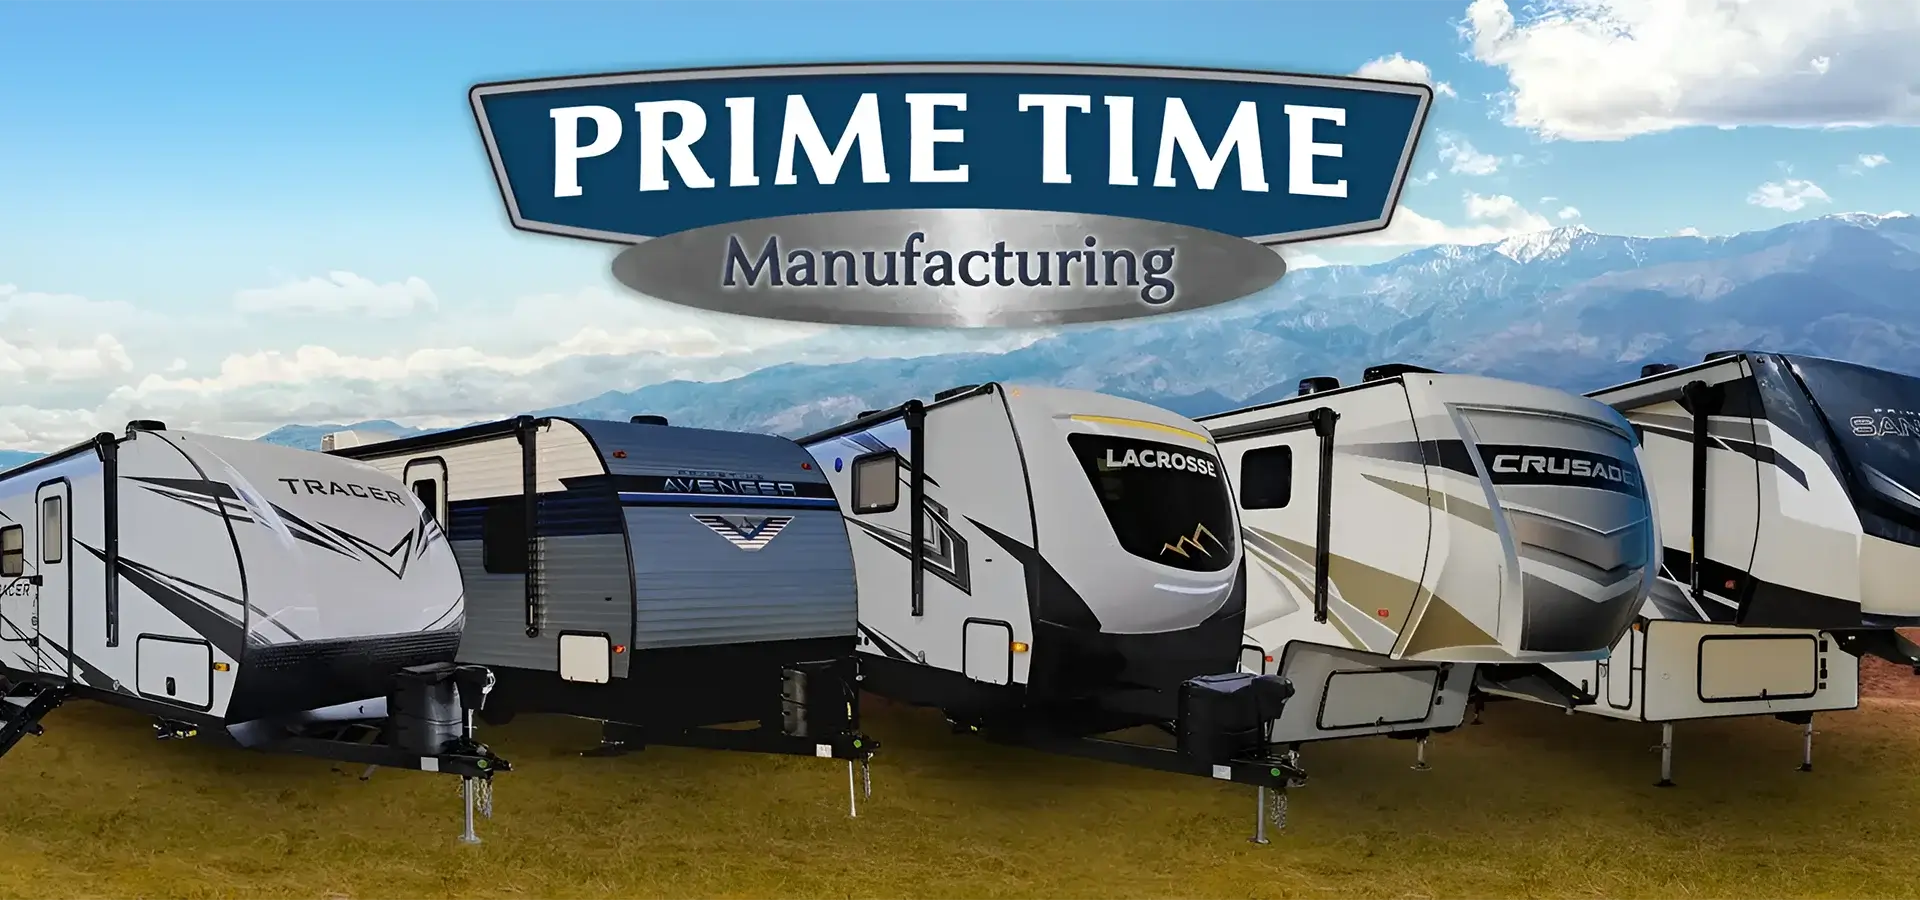 Welcome to Prime Time Manufaturing.